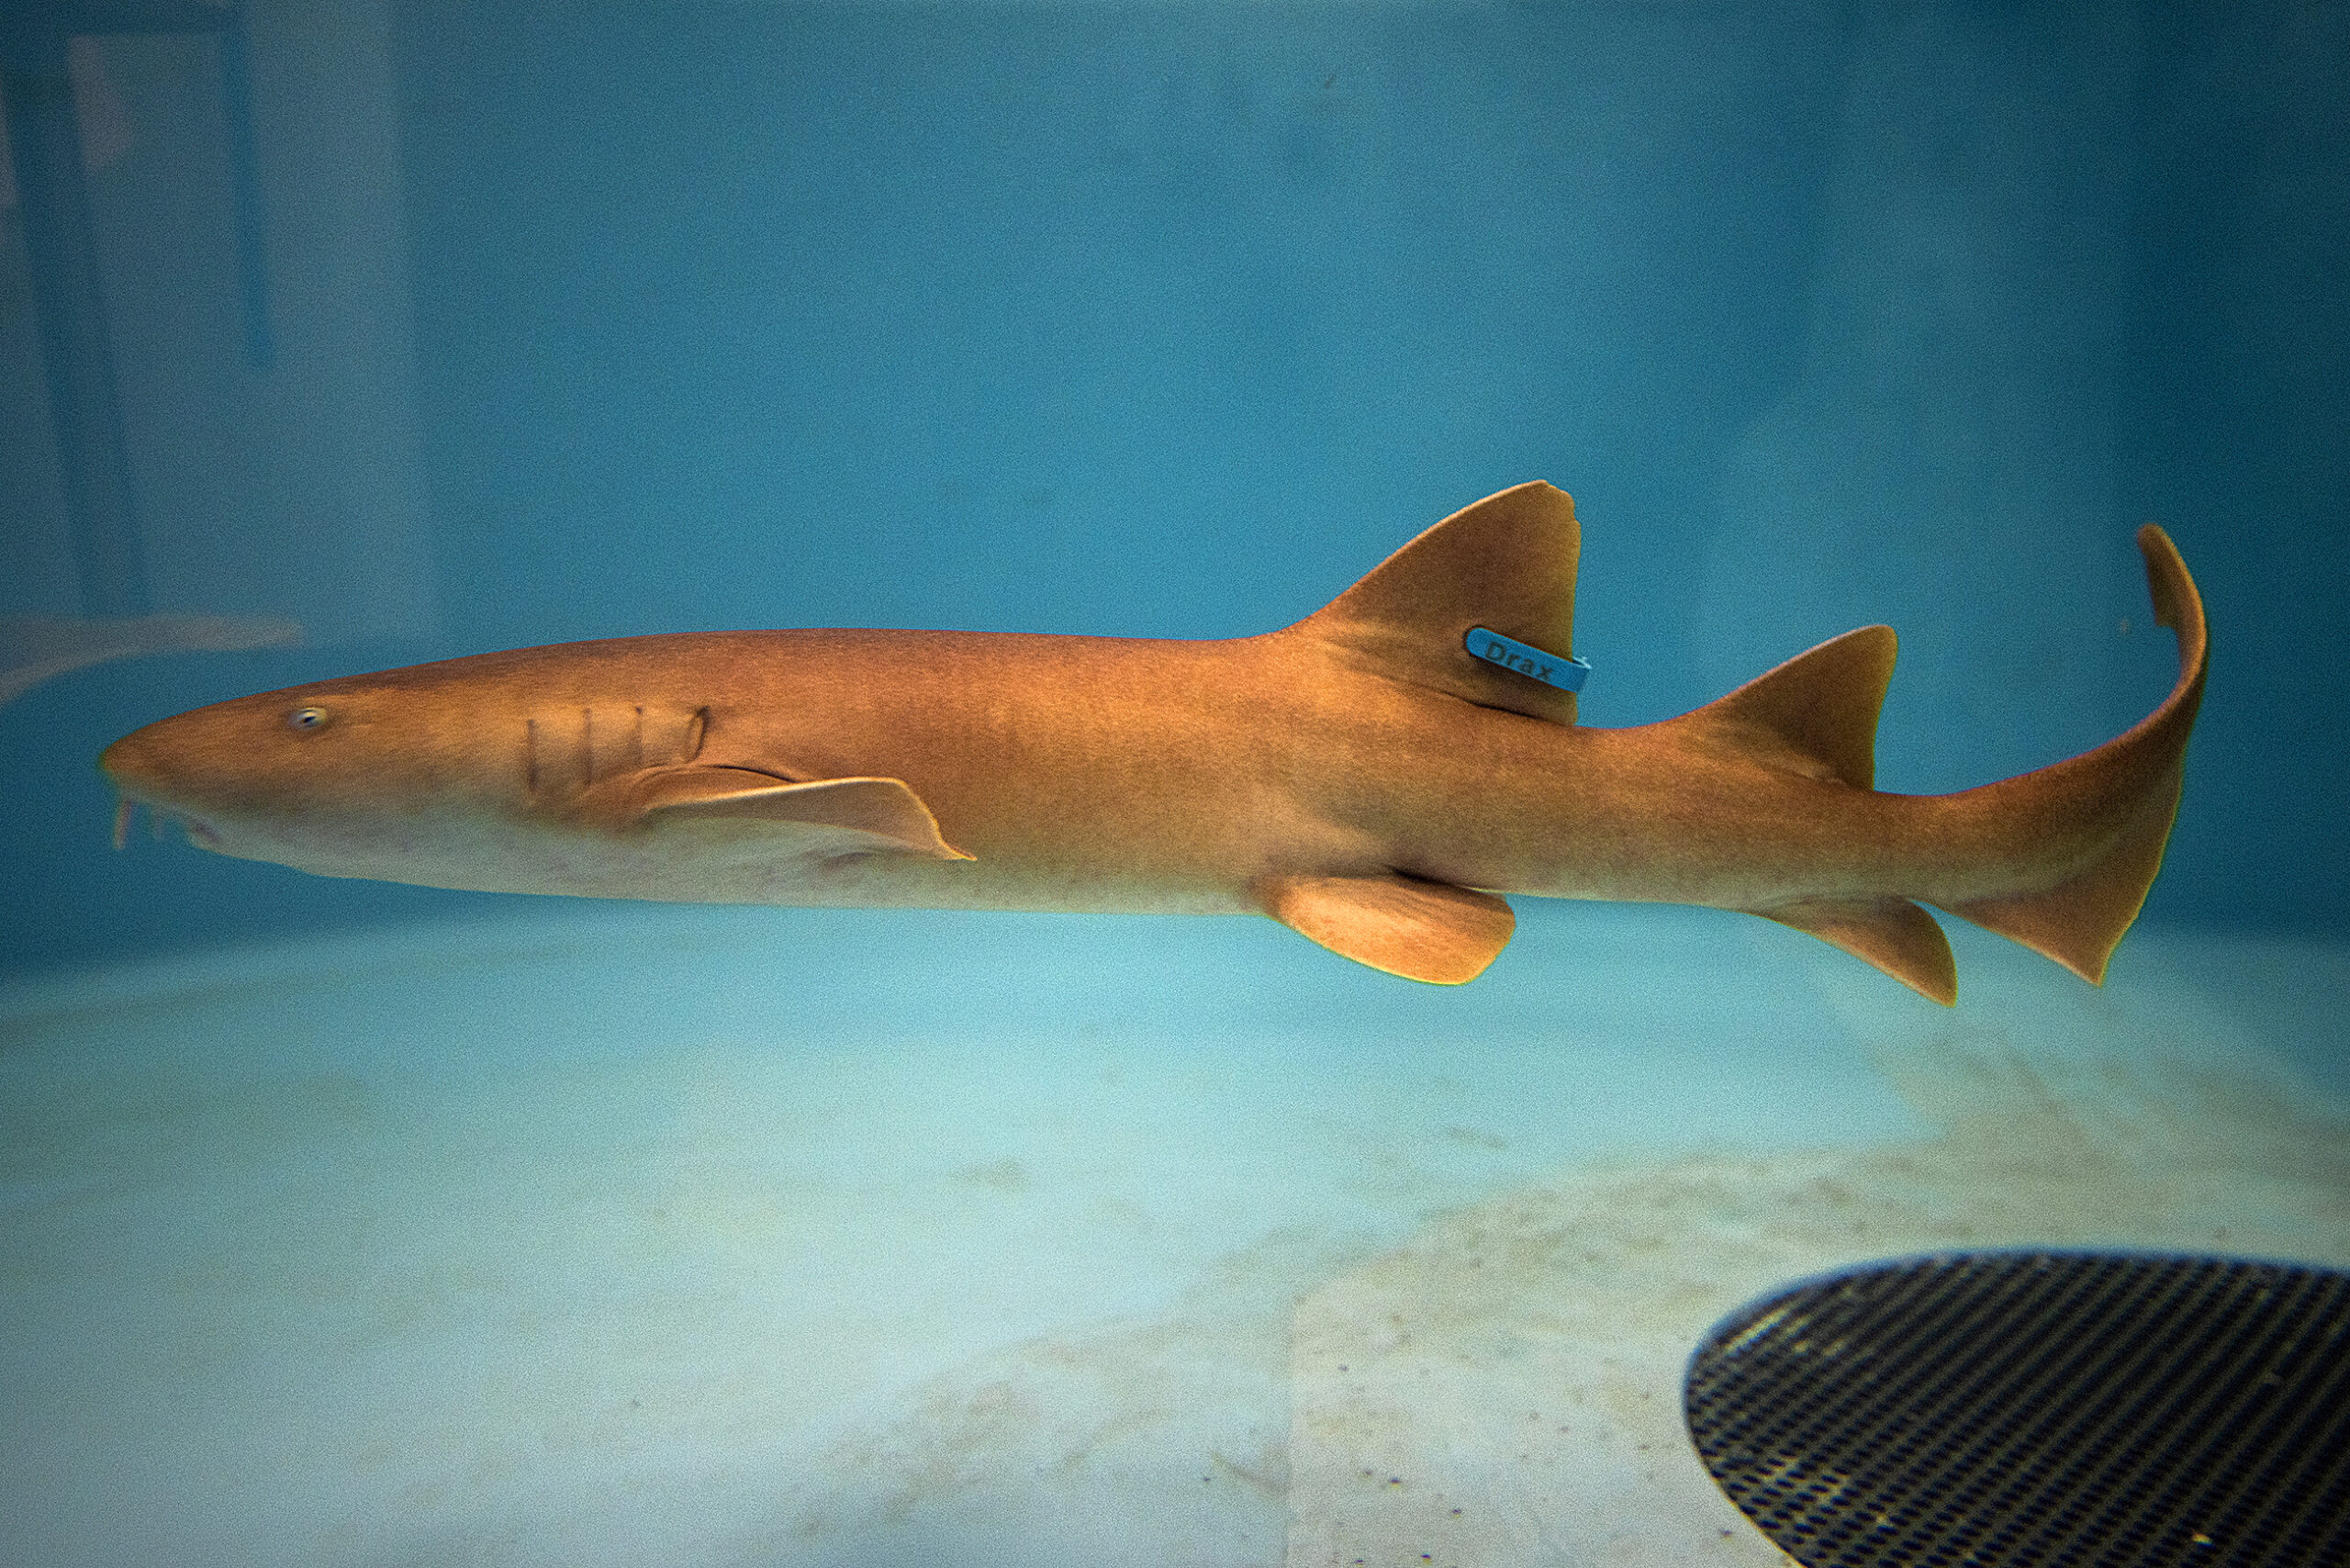 A shark can be seen from the side with a long, slender body.